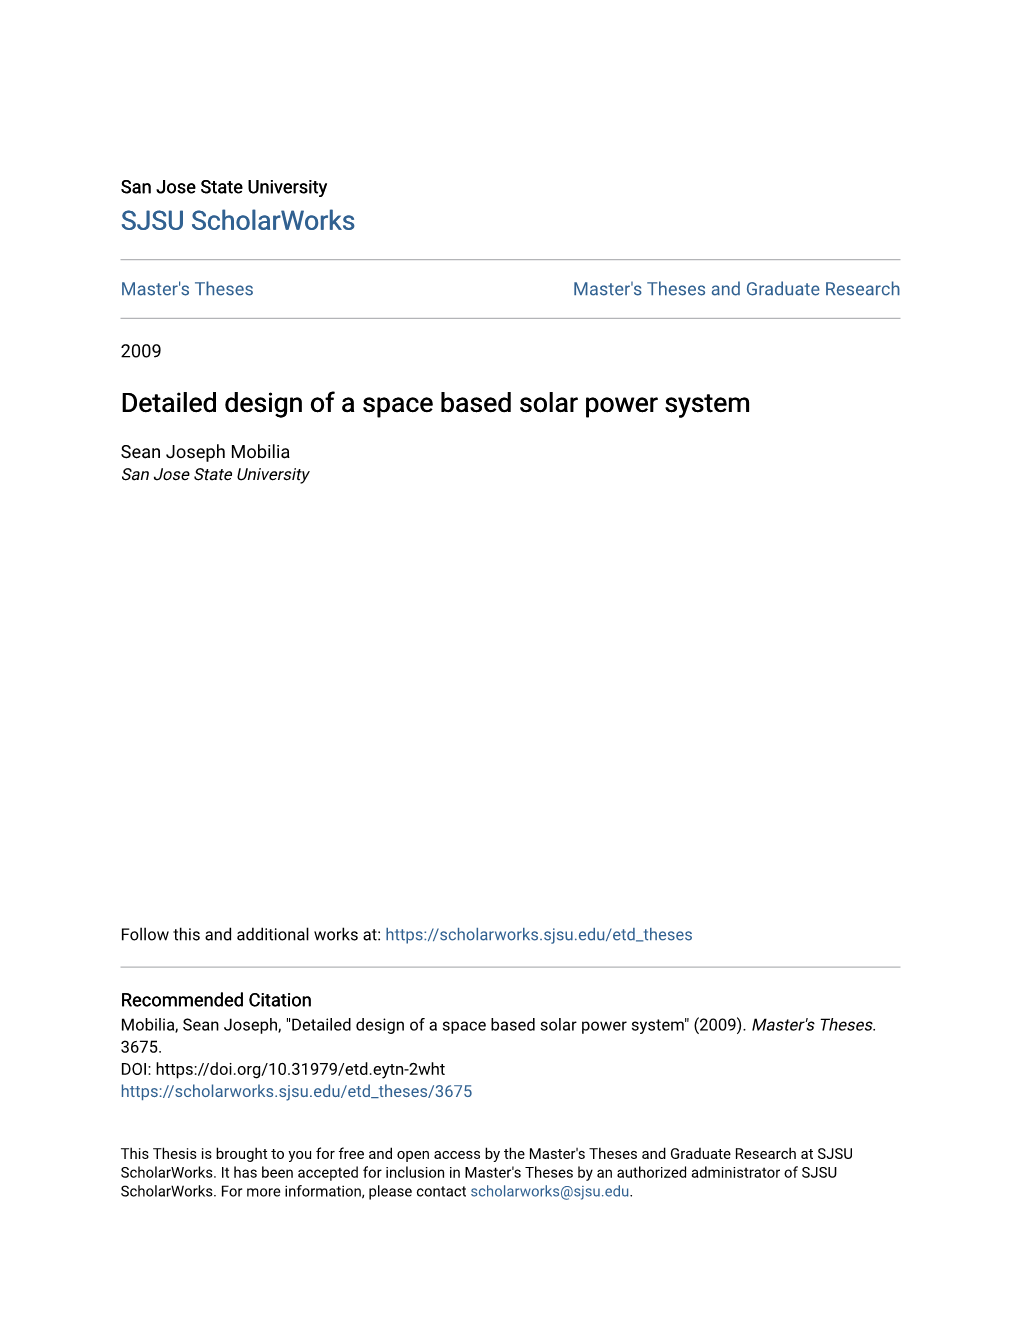 Detailed Design of a Space Based Solar Power System